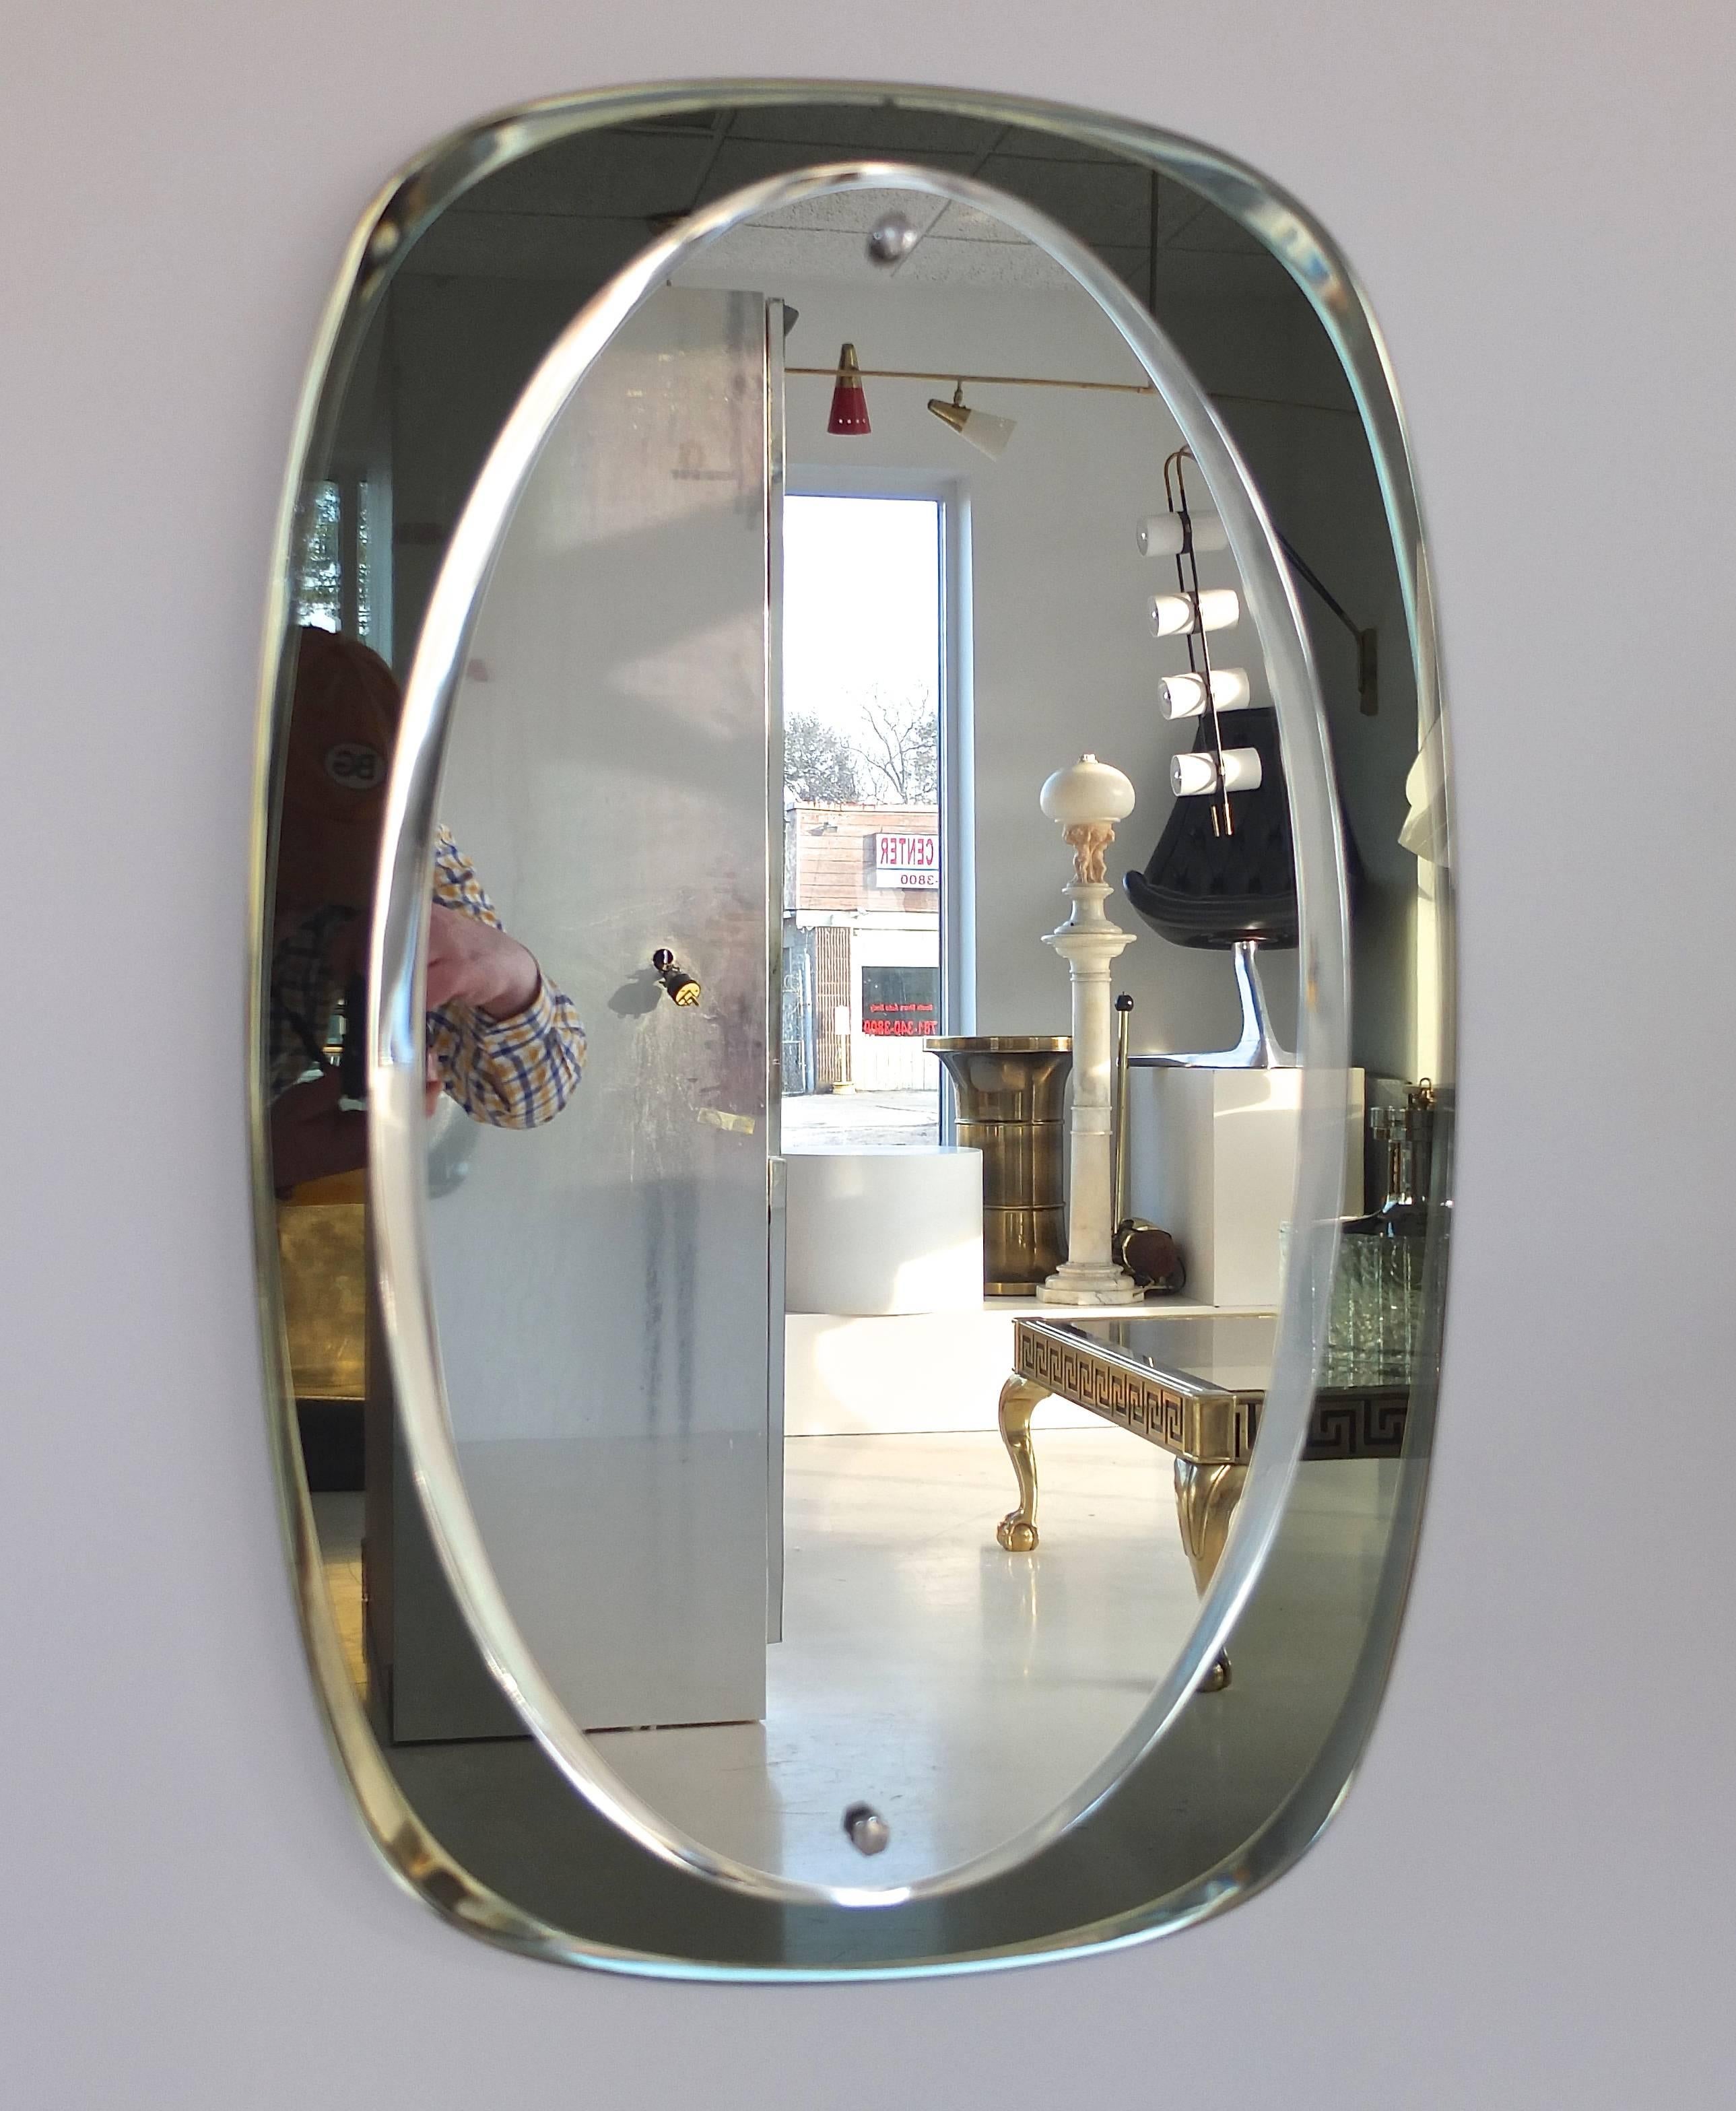 Mid-Century Modern Italian wall mirror by crystal Art, circa 1955. Oval shaped beveled mirror with a dark smokey green color glass cushion form outer frame, bonded with two chrome plated hexagonal fittings.

   